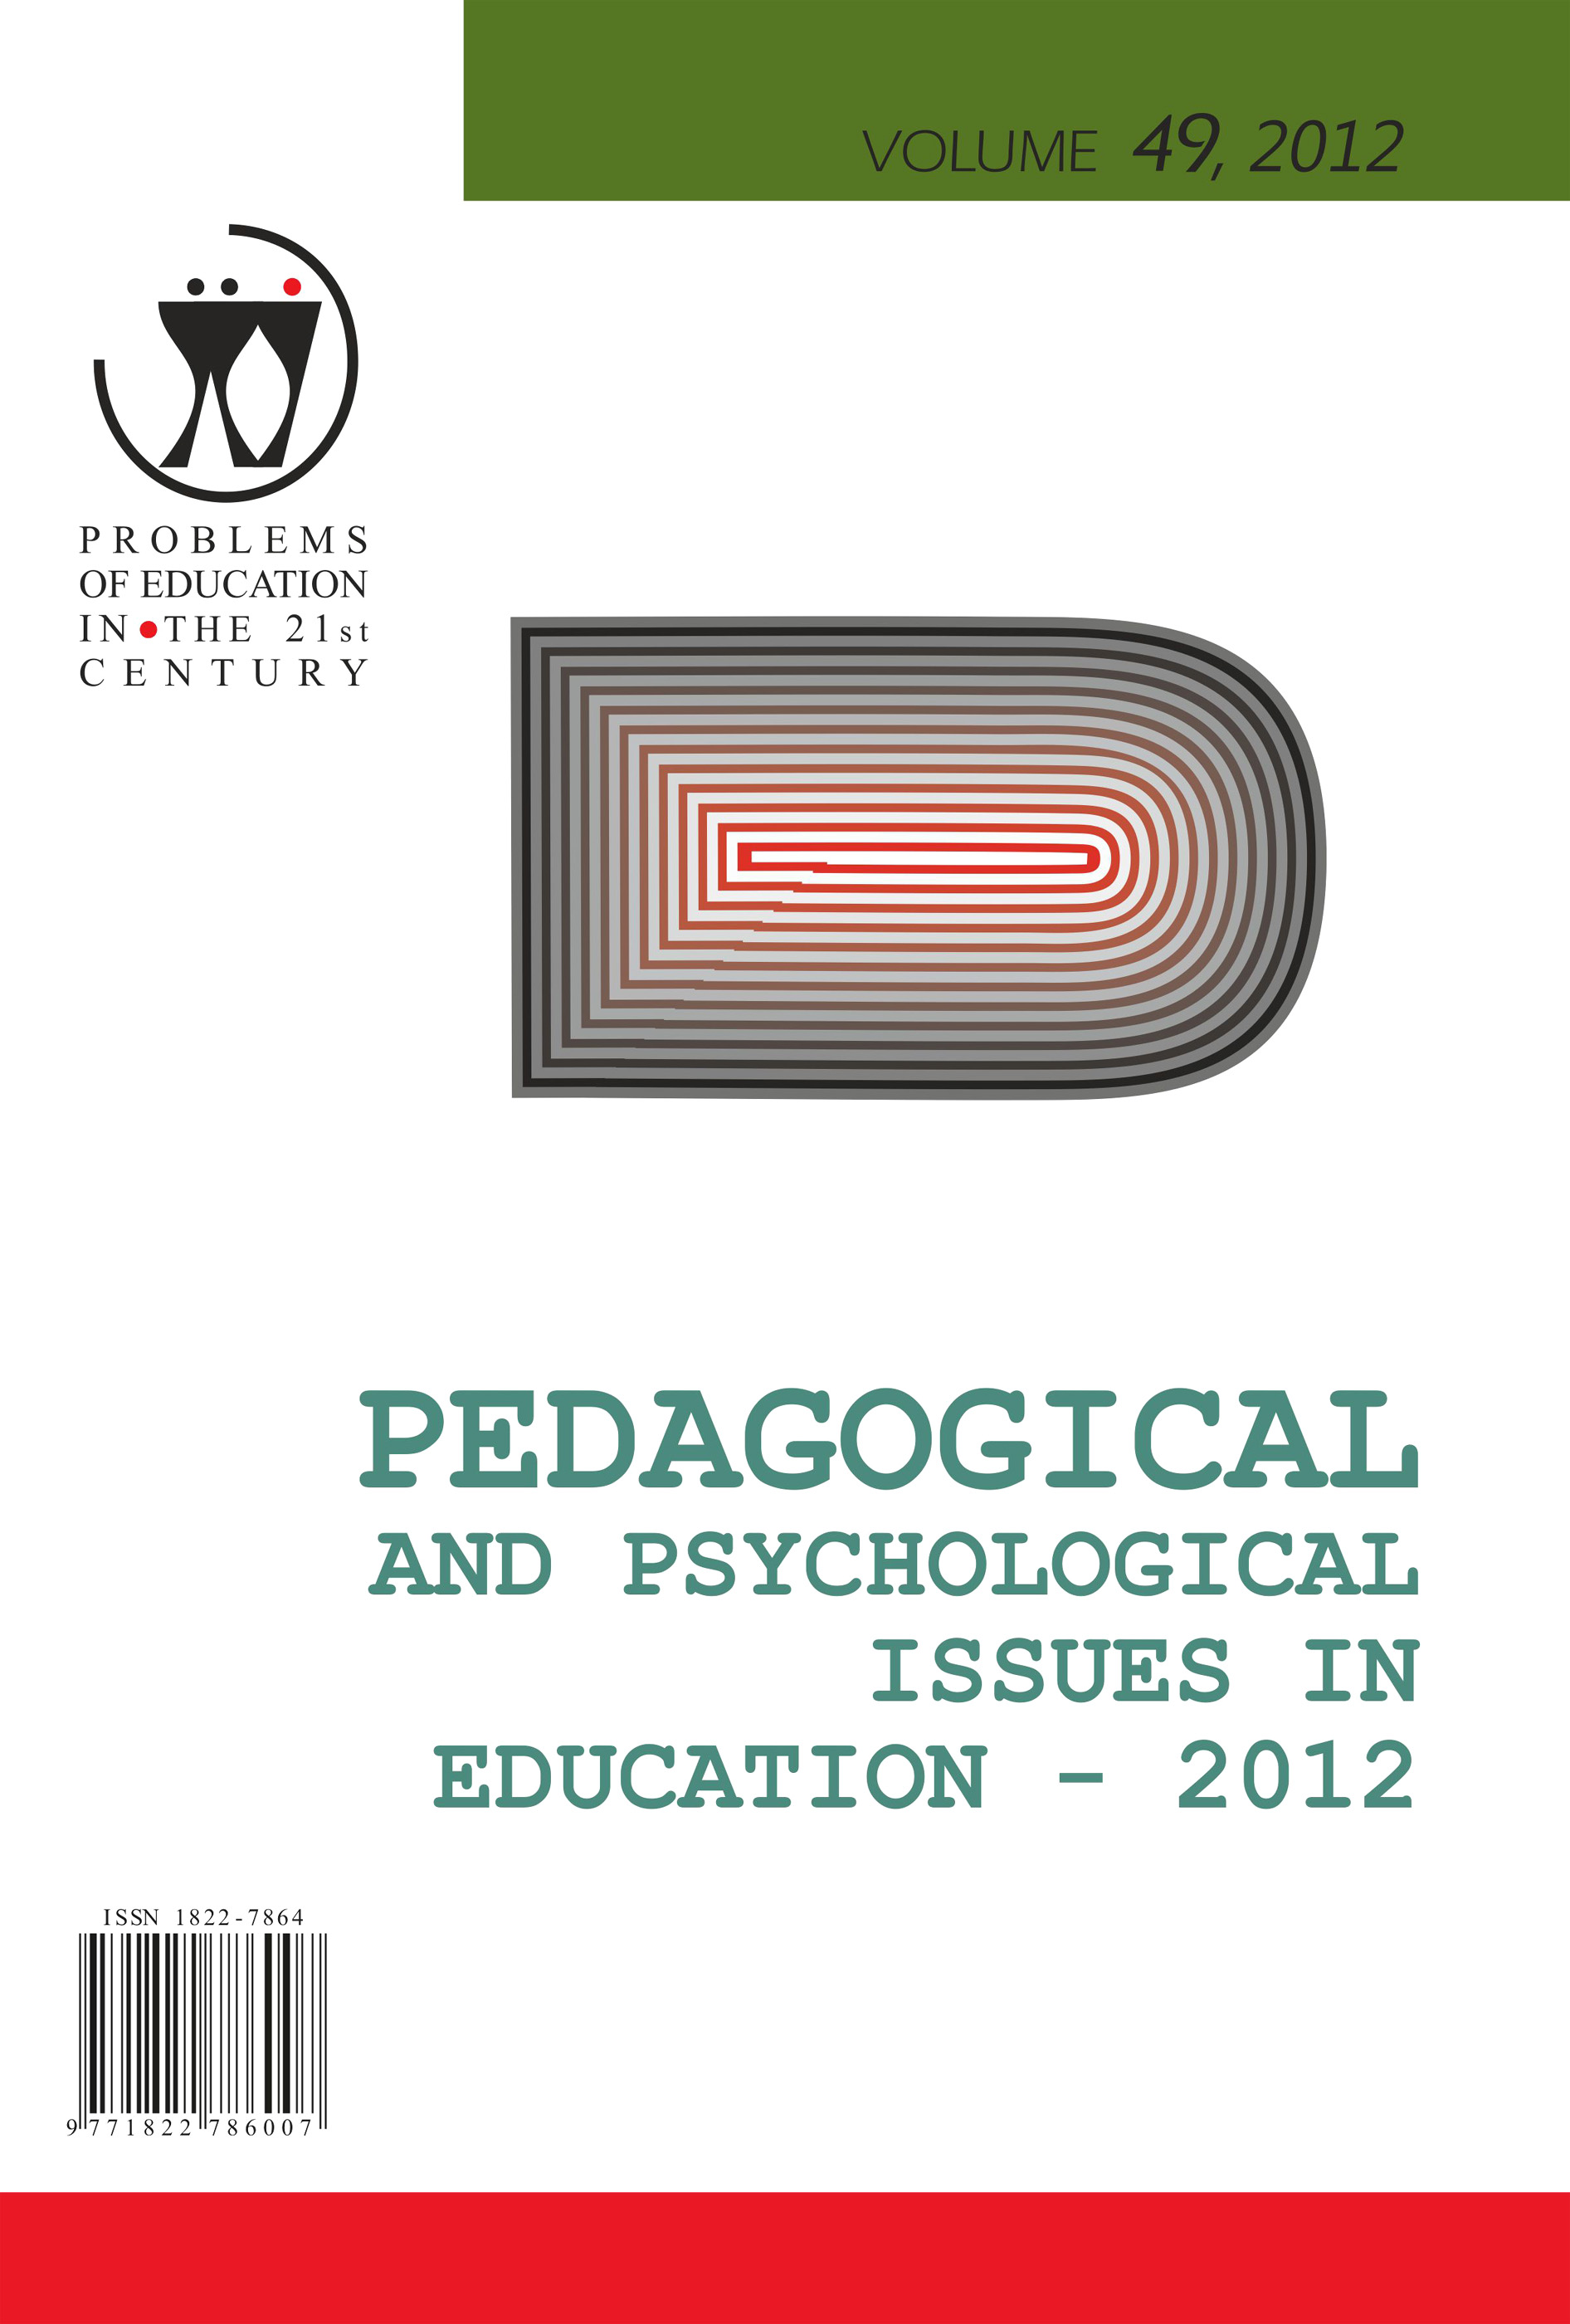 PSYCHOLOGICAL WELL-BEING AND ITS RELATION TO ACADEMIC PERFORMANCE OF STUDENTS IN GEORGIAN CONTEXT